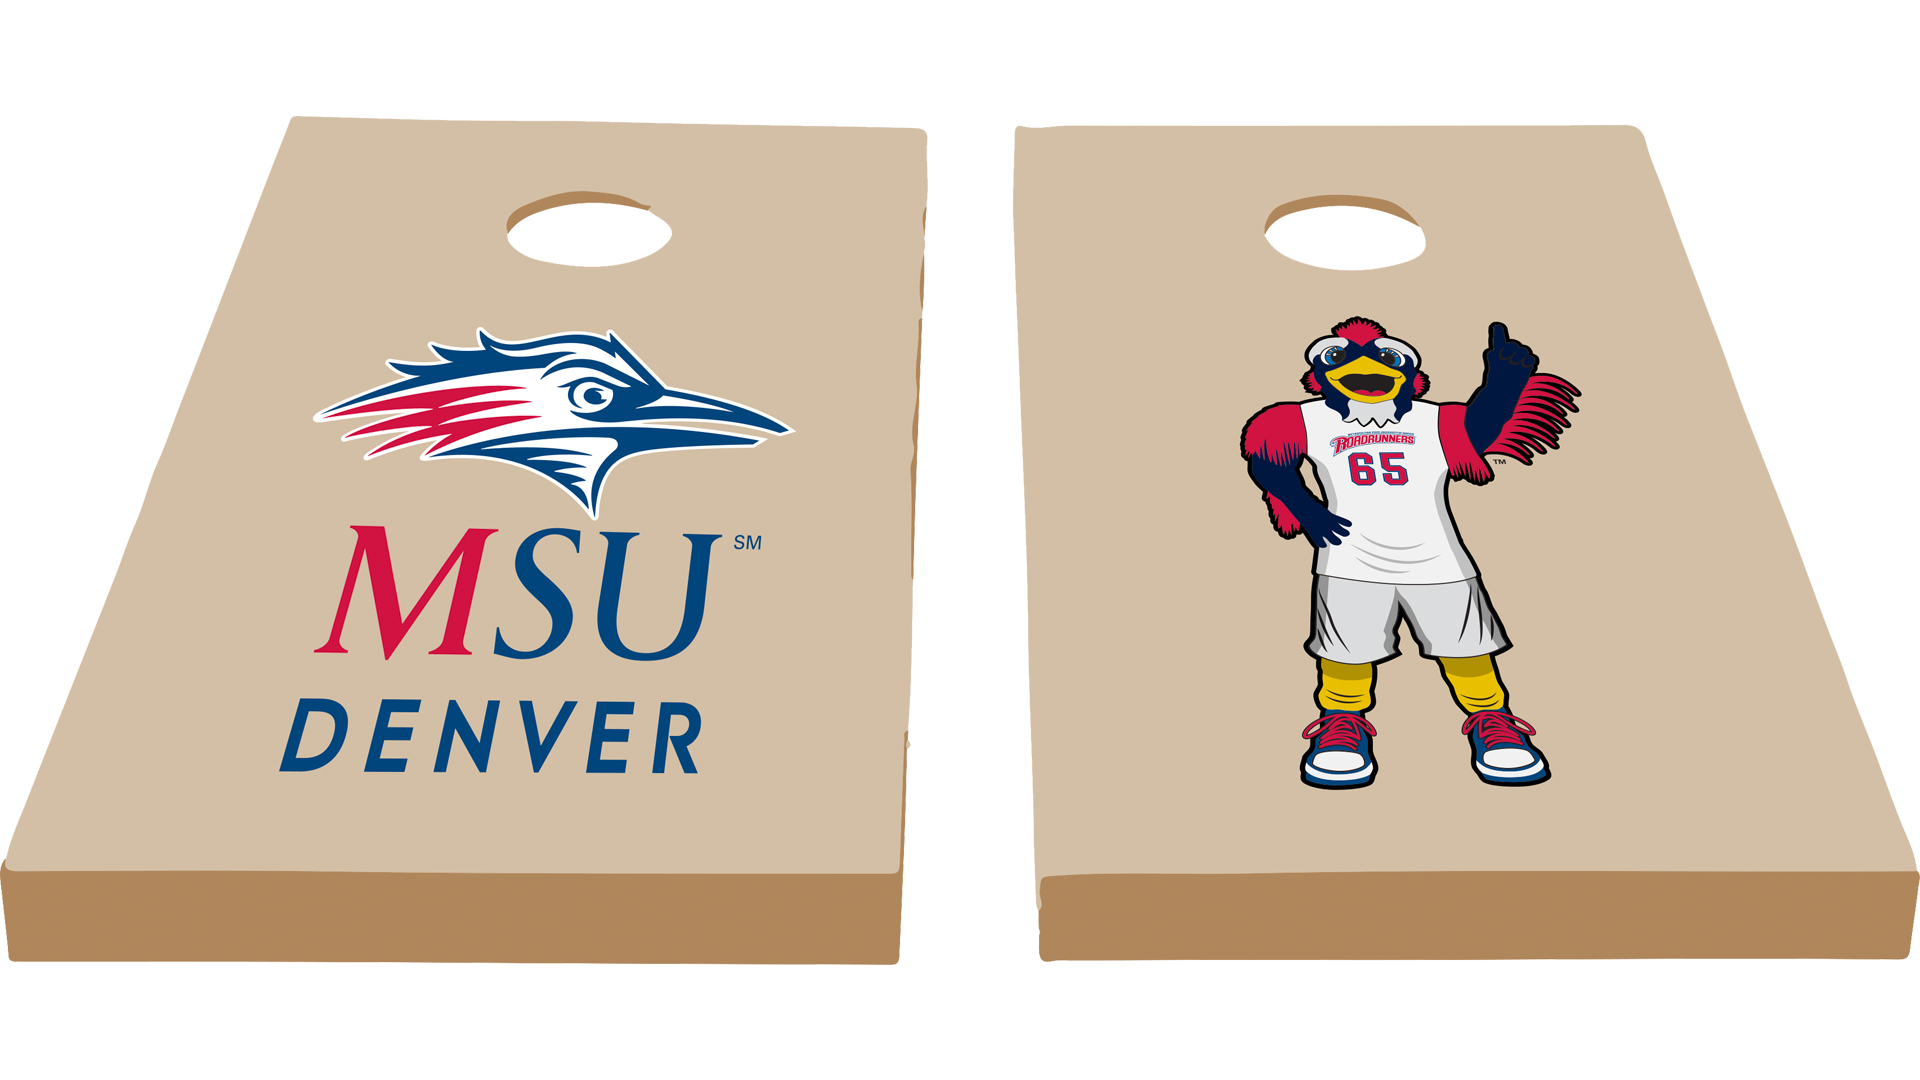 Two cornhole boards, one with the MSU Denver logo and the other with a cartoon Rowdy